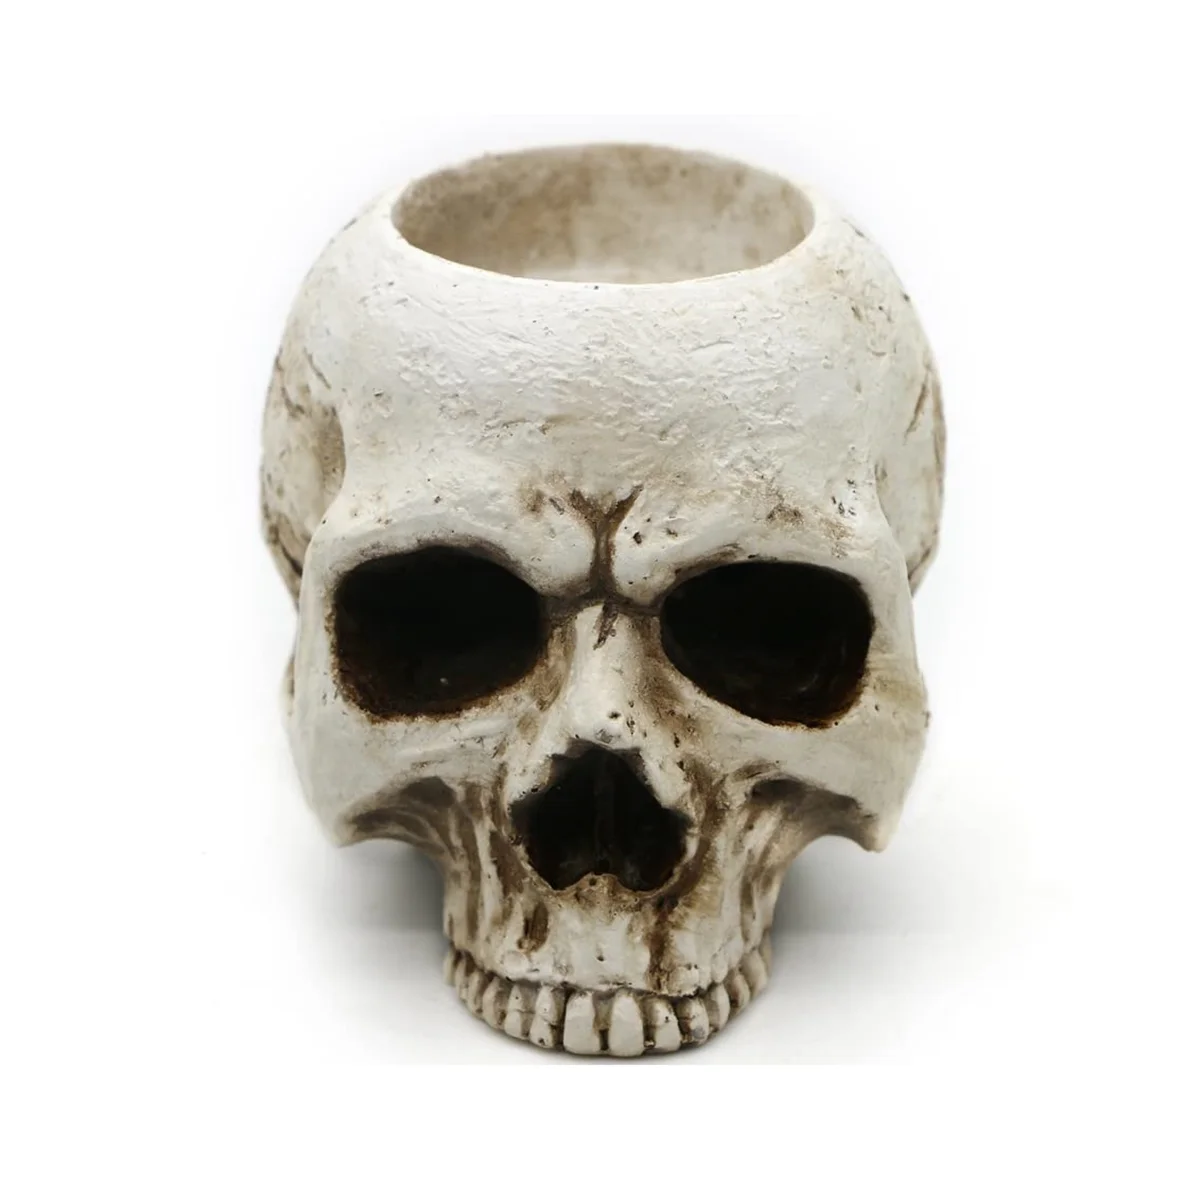 Skull Candle Holder-Gothic Shed Tears Human Skull Candle Holder Novelty  Skull Bone Candlestick Halloween White - AliExpress